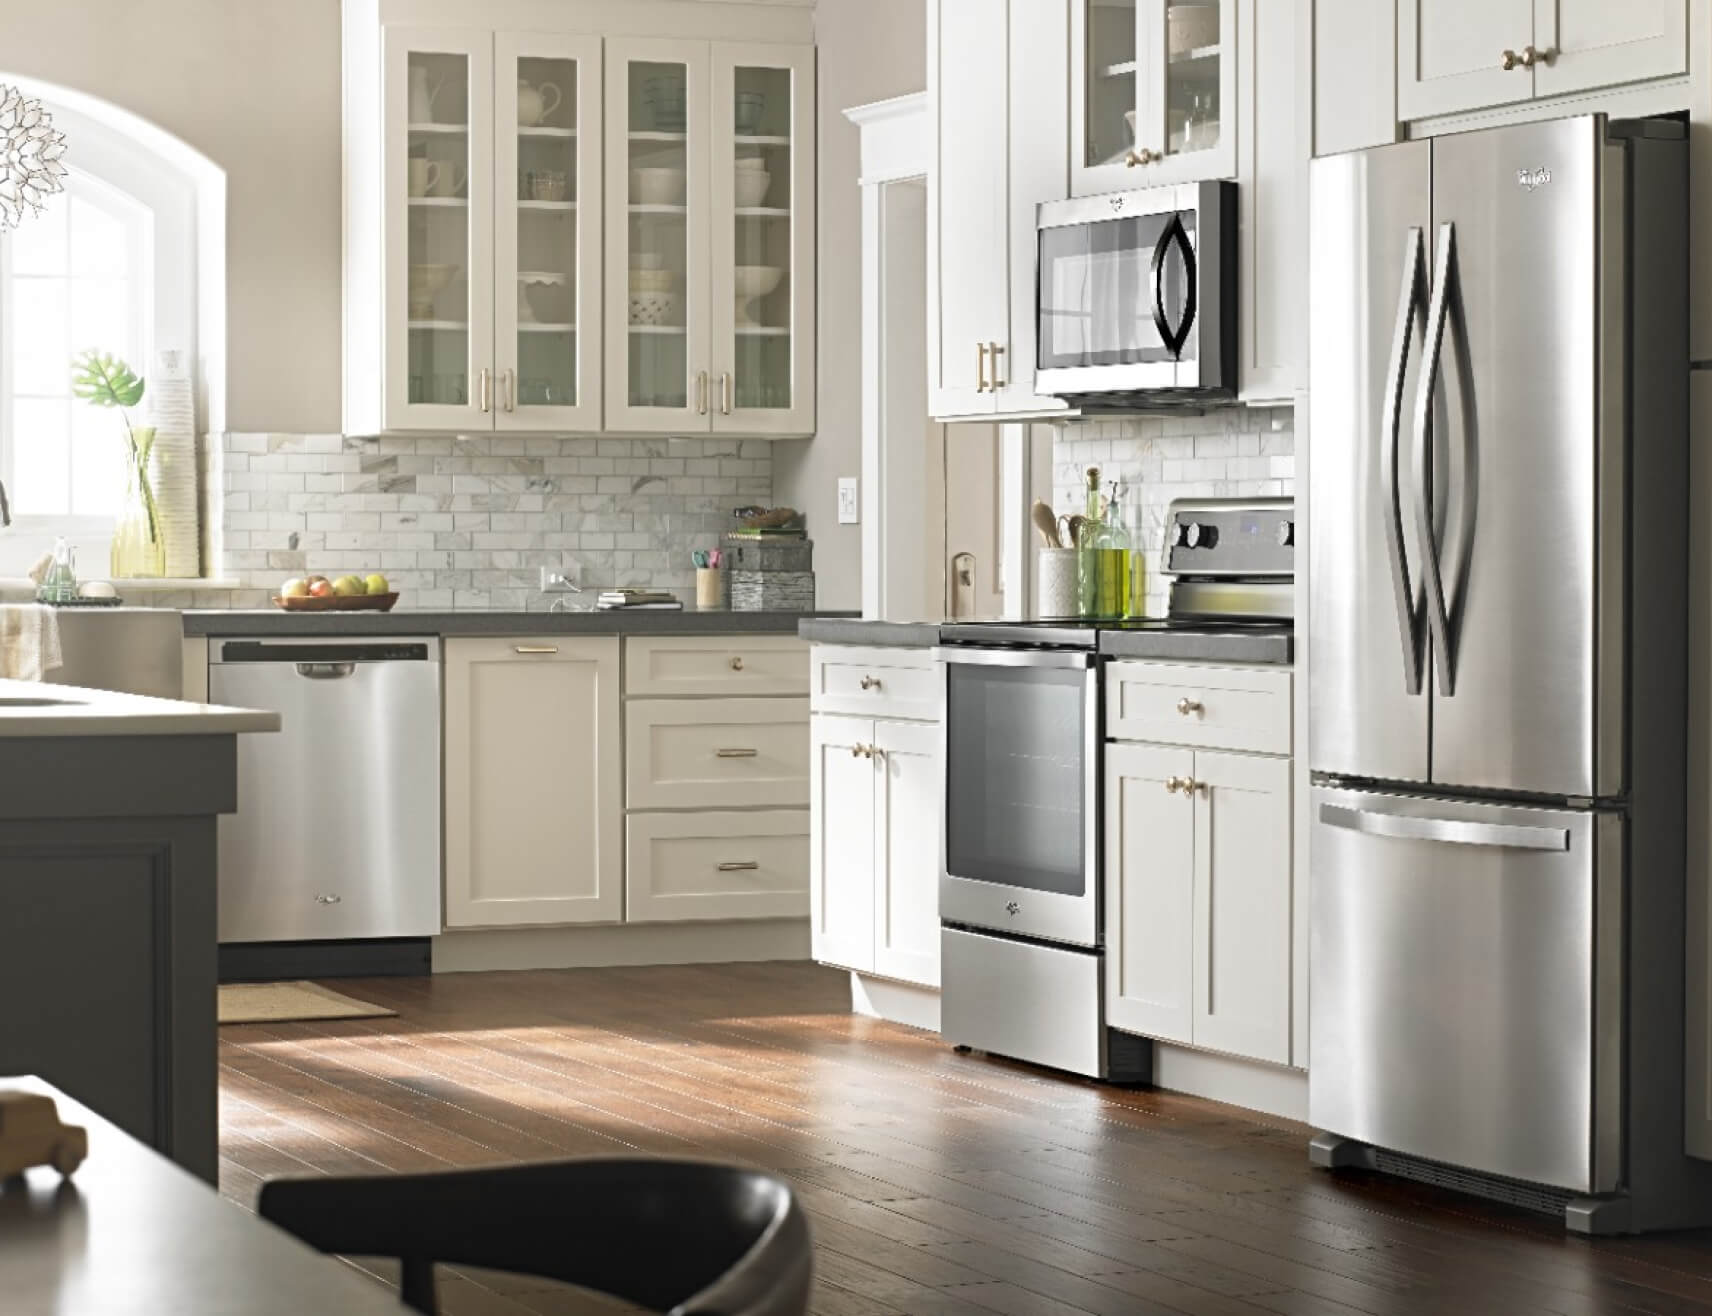 A Whirlpool® Kitchen Suite with light cabinets